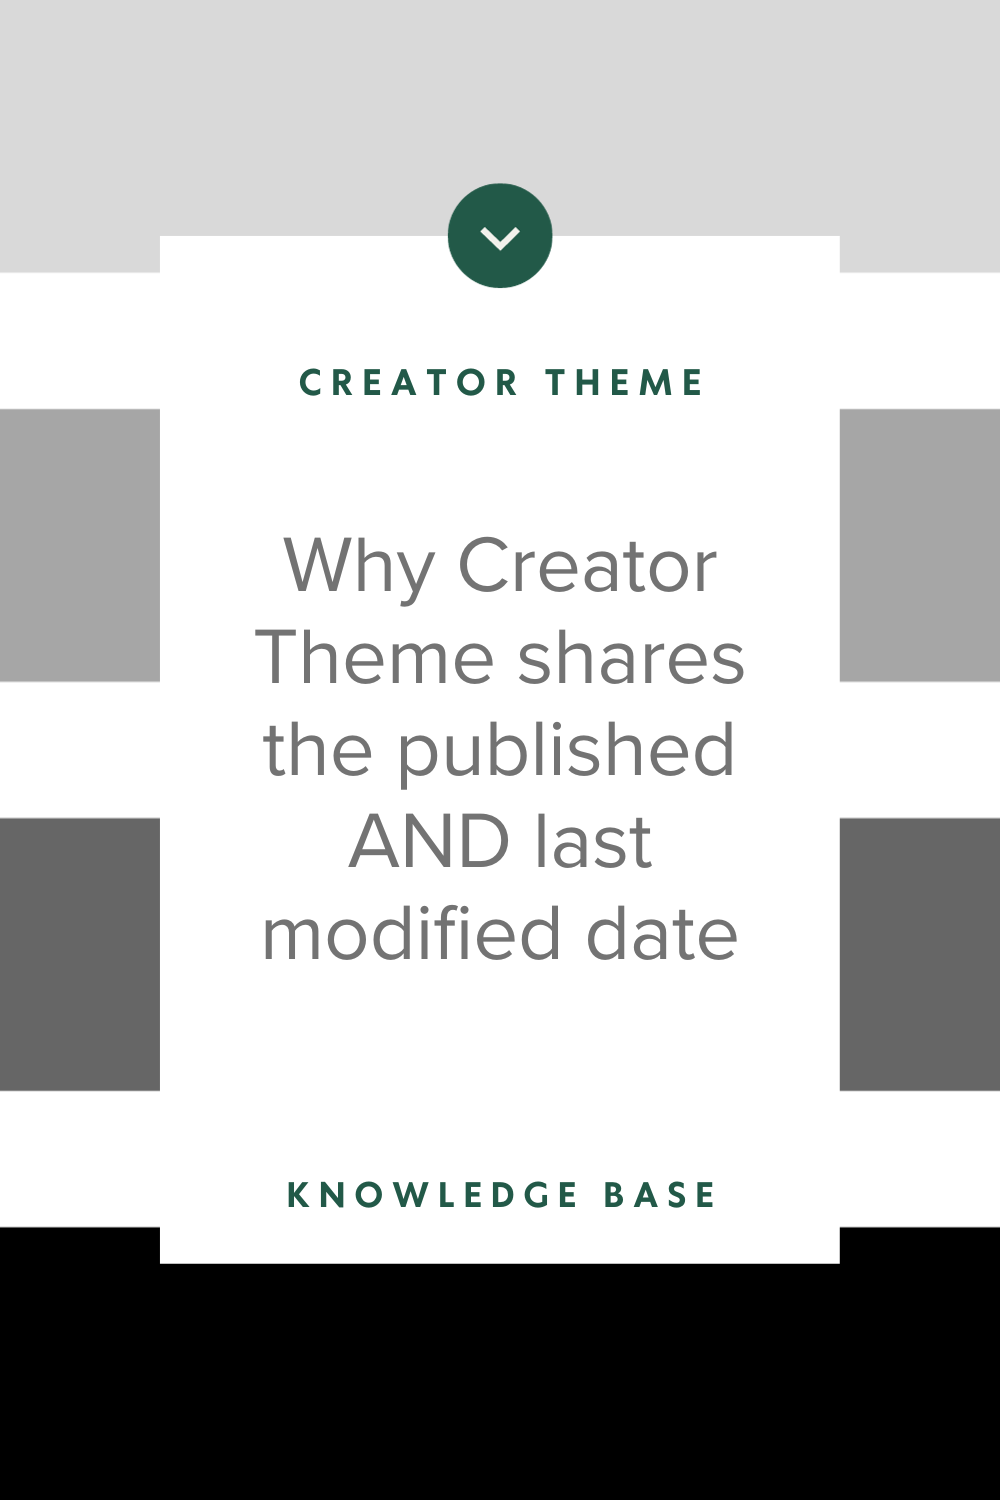 Why Creator theme shares the published and last modified date